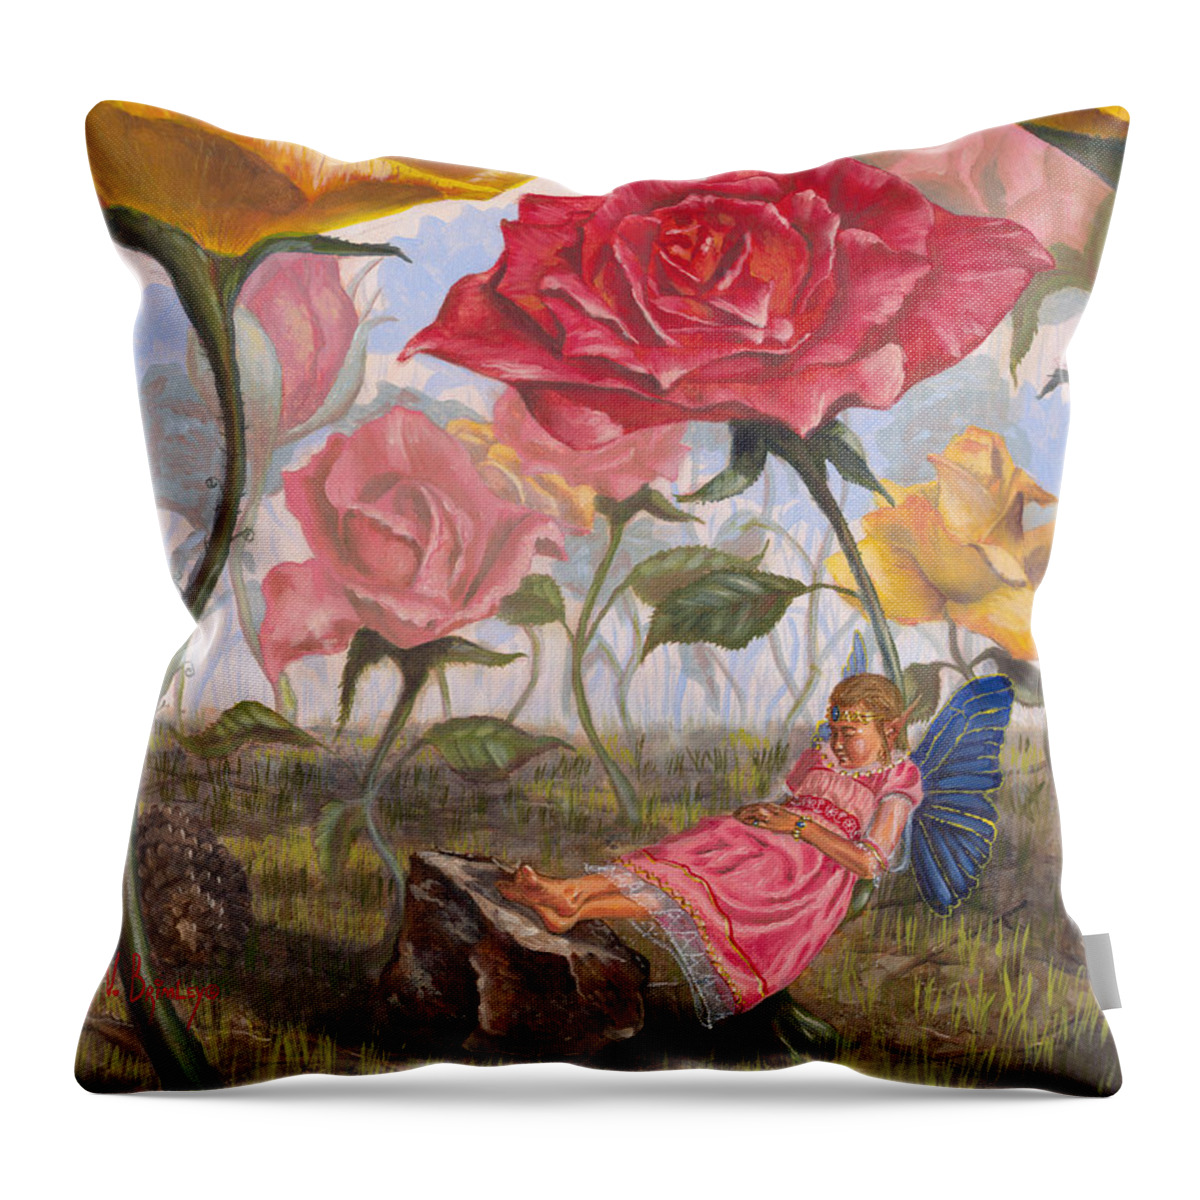 Fairy Throw Pillow featuring the painting A Little Nap by Jeff Brimley